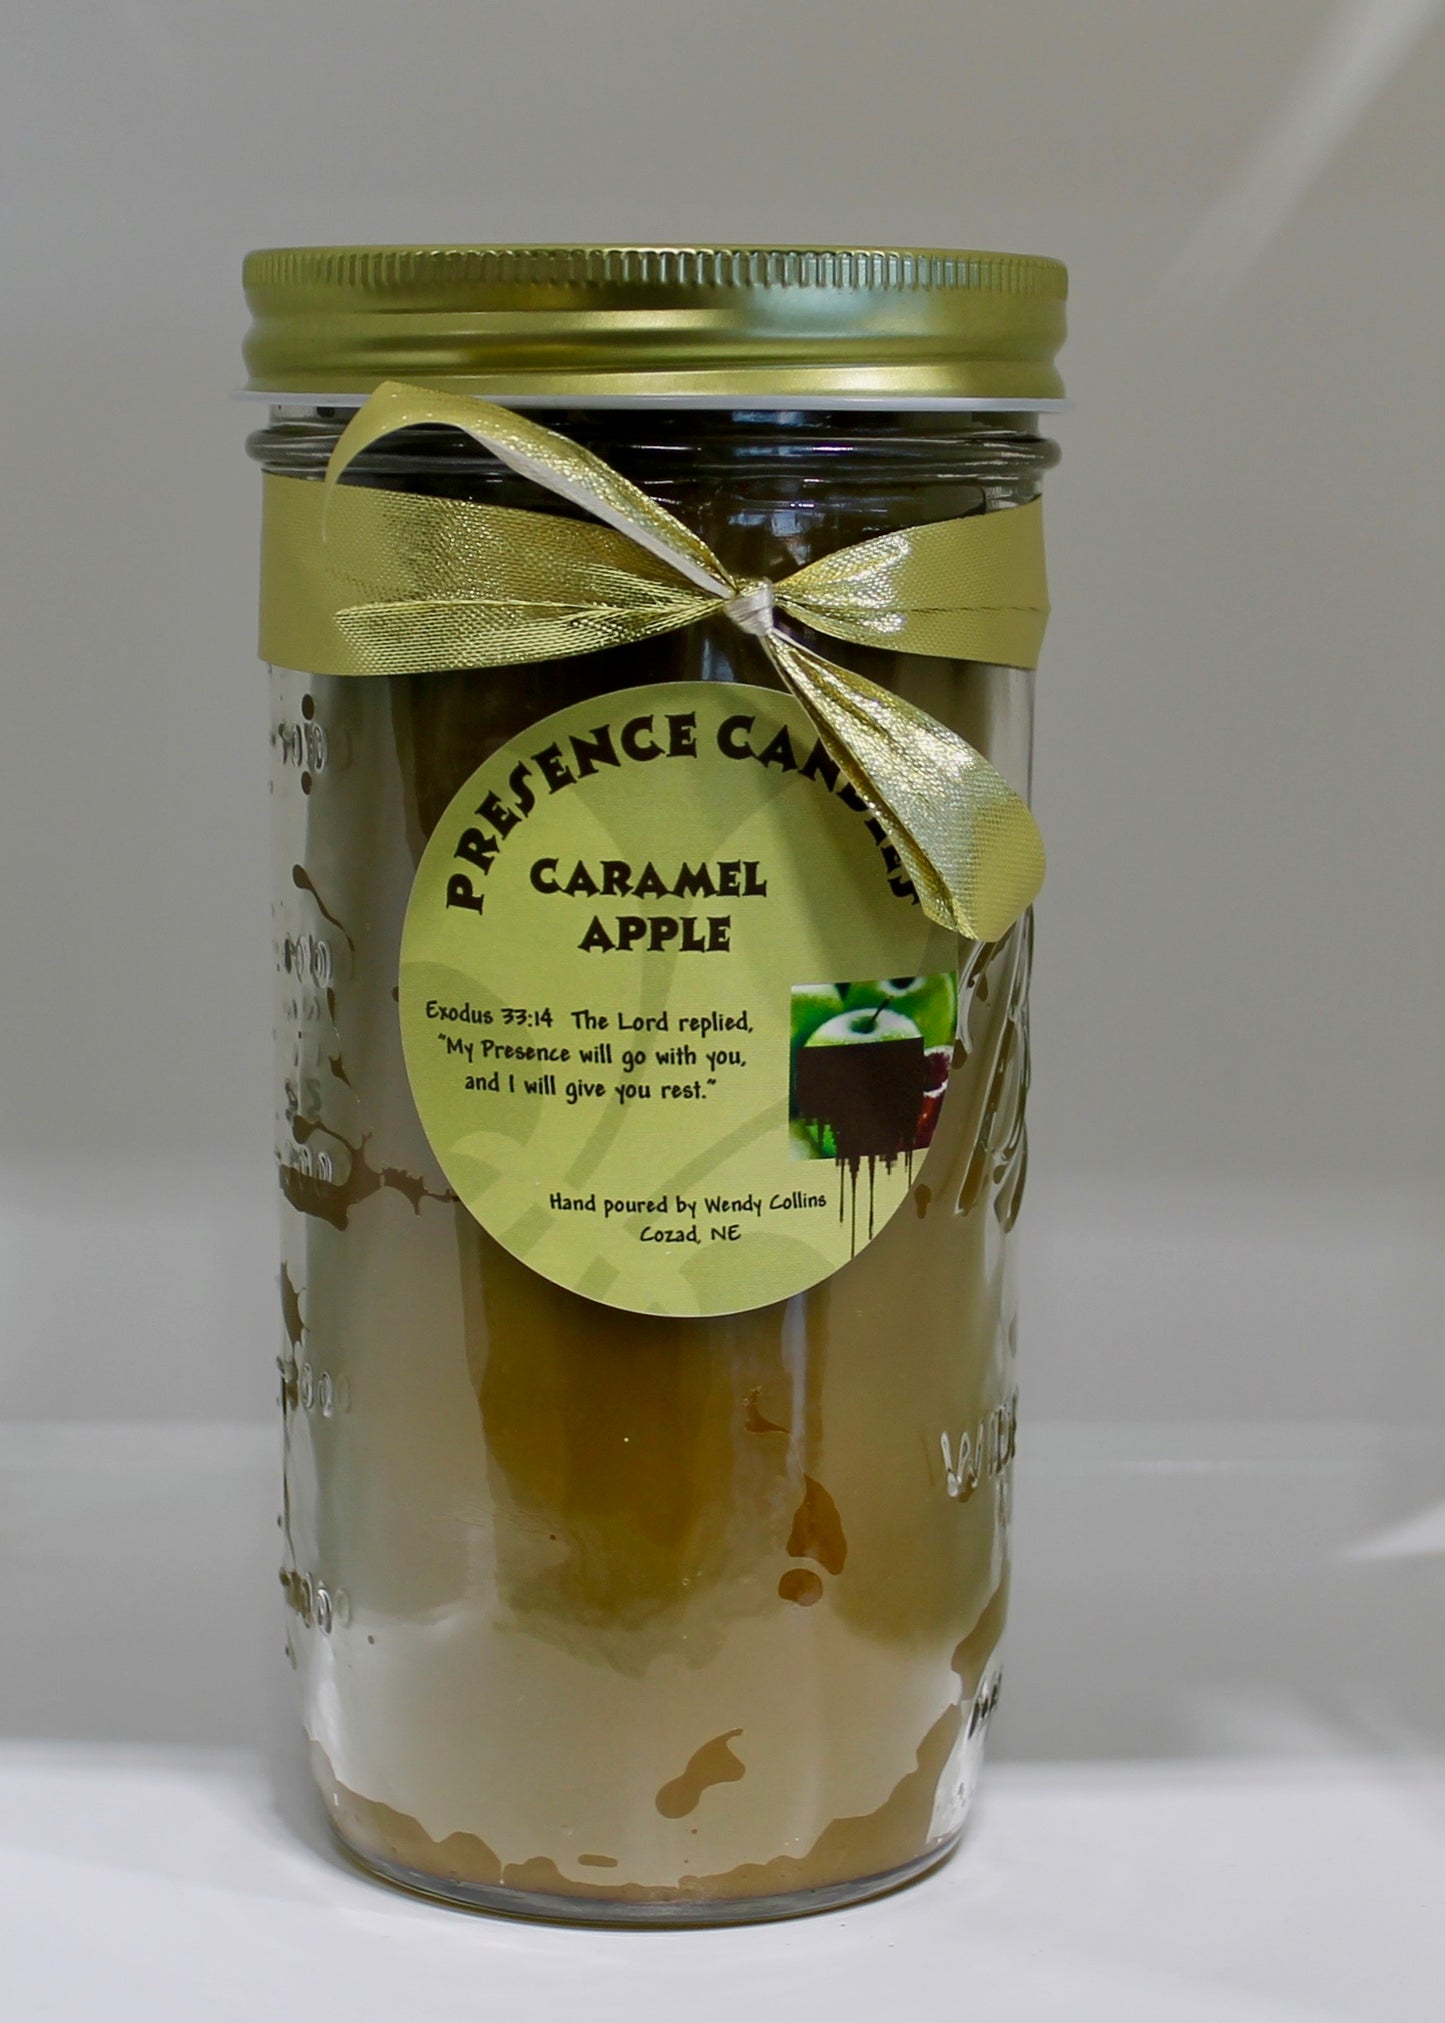 Caramel Apple Scented Candle